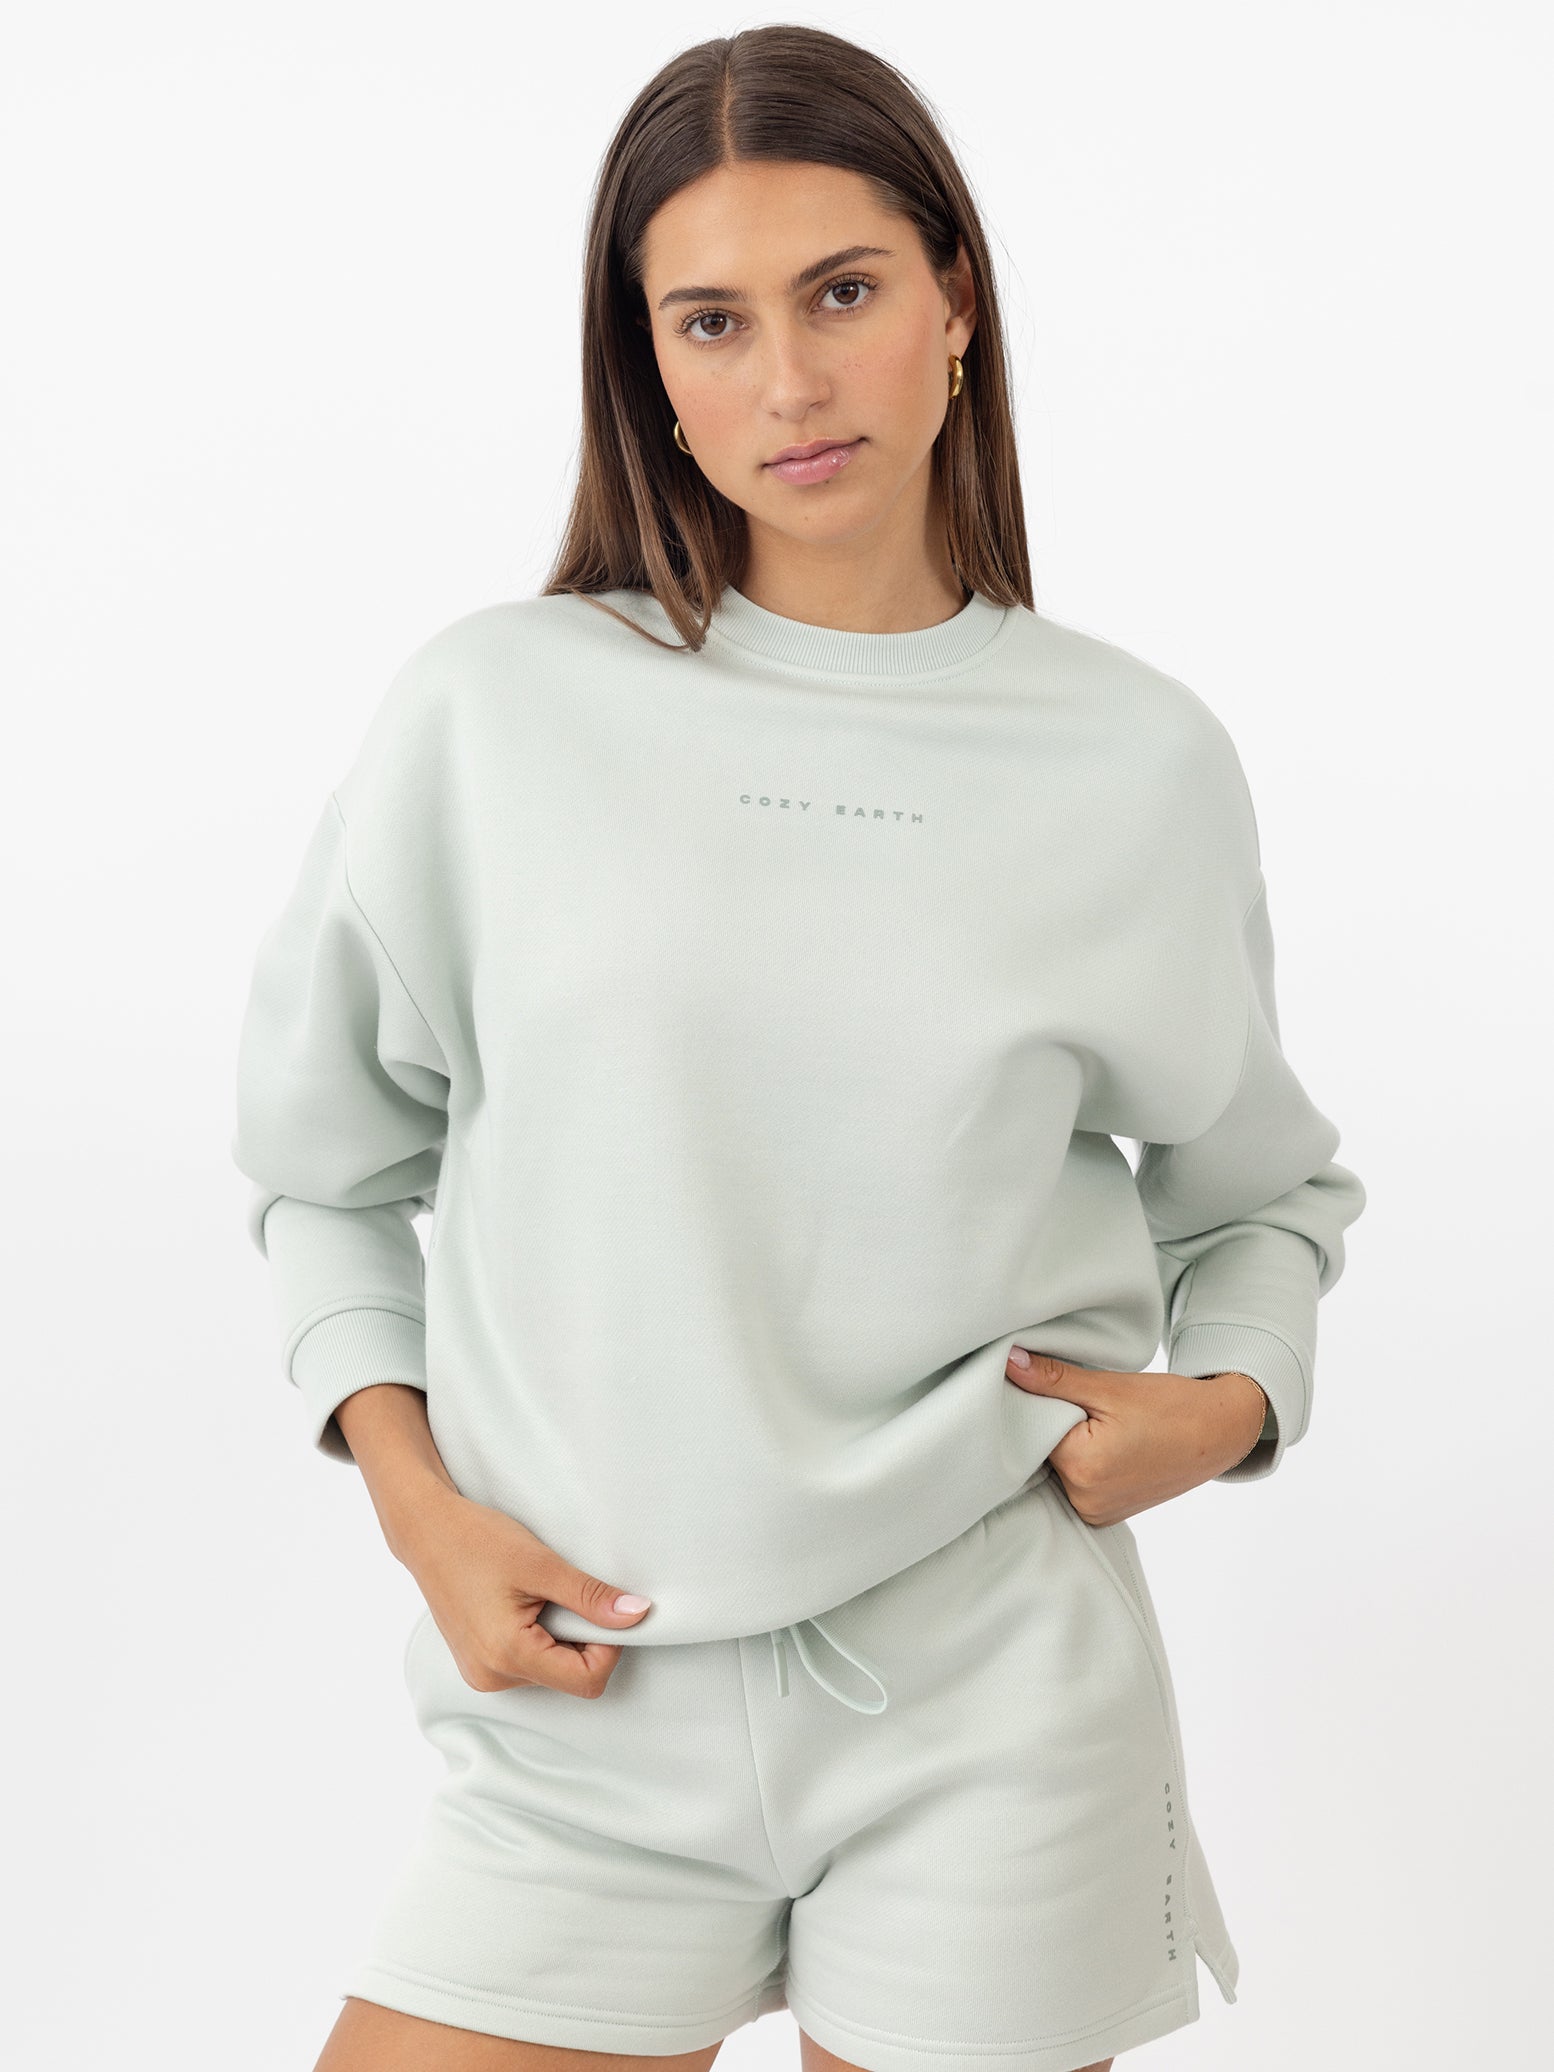 Arctic CityScape Pullover Crew. The Pullover is being worn by a female model. Accompanying city scape clothing is being worn to complete the look of the outfit. The photo was taken with a white background. |Color:Arctic